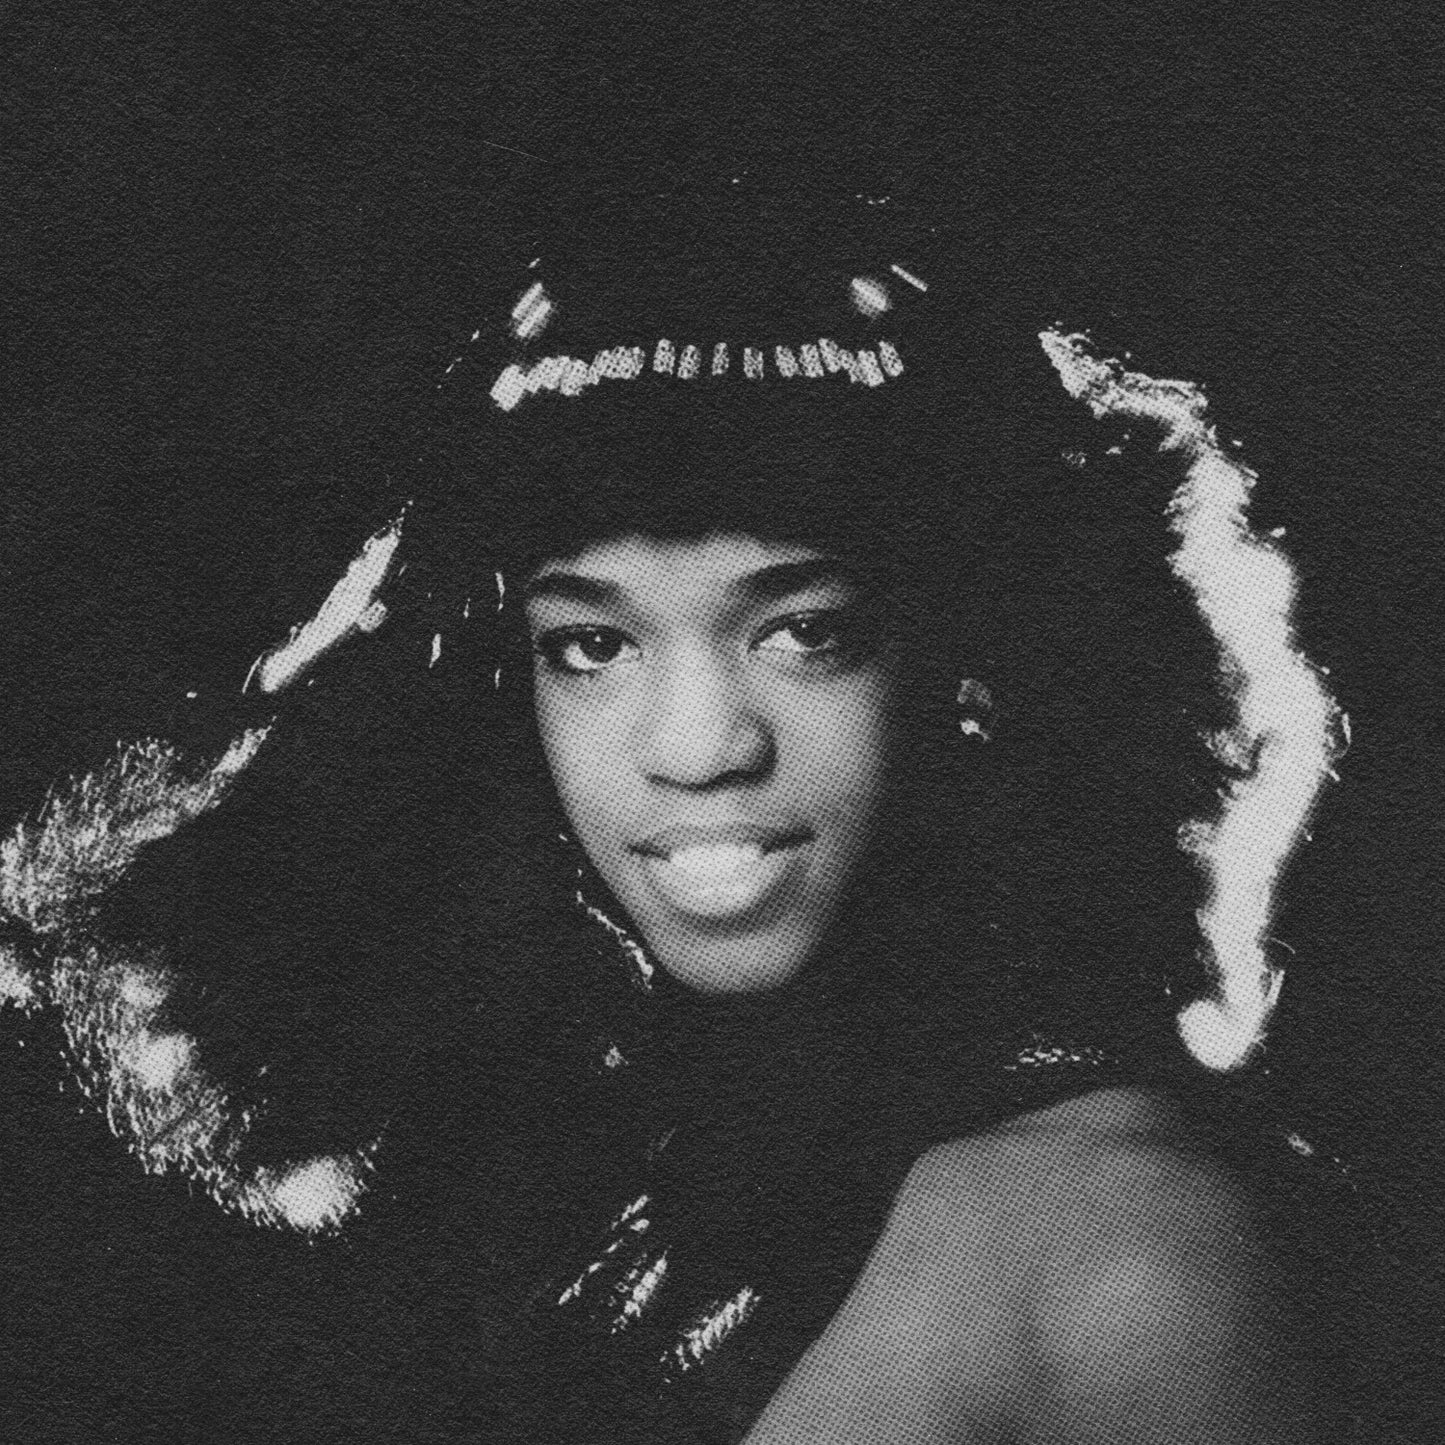 EVELYN "CHAMPAGNE" KING